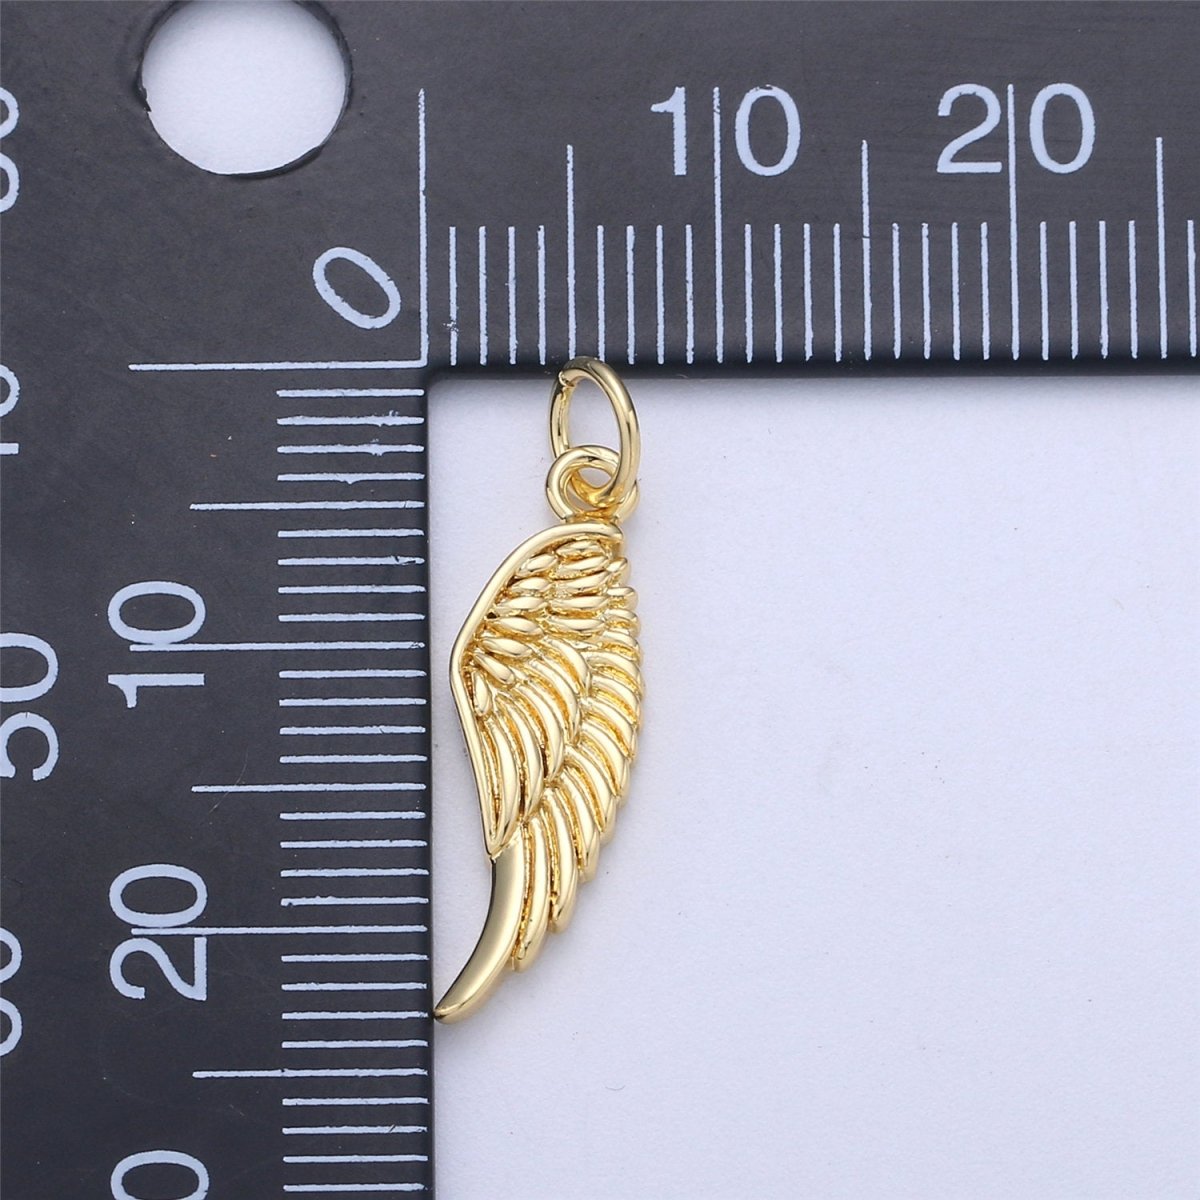 Small Angel Wing Charm, Gold Angel Wing Charm, Silver Wings, Black Guardian Angel Wing Charms, Angel Wing Jewelry, Dainty Charm Bracelet C-926 - DLUXCA